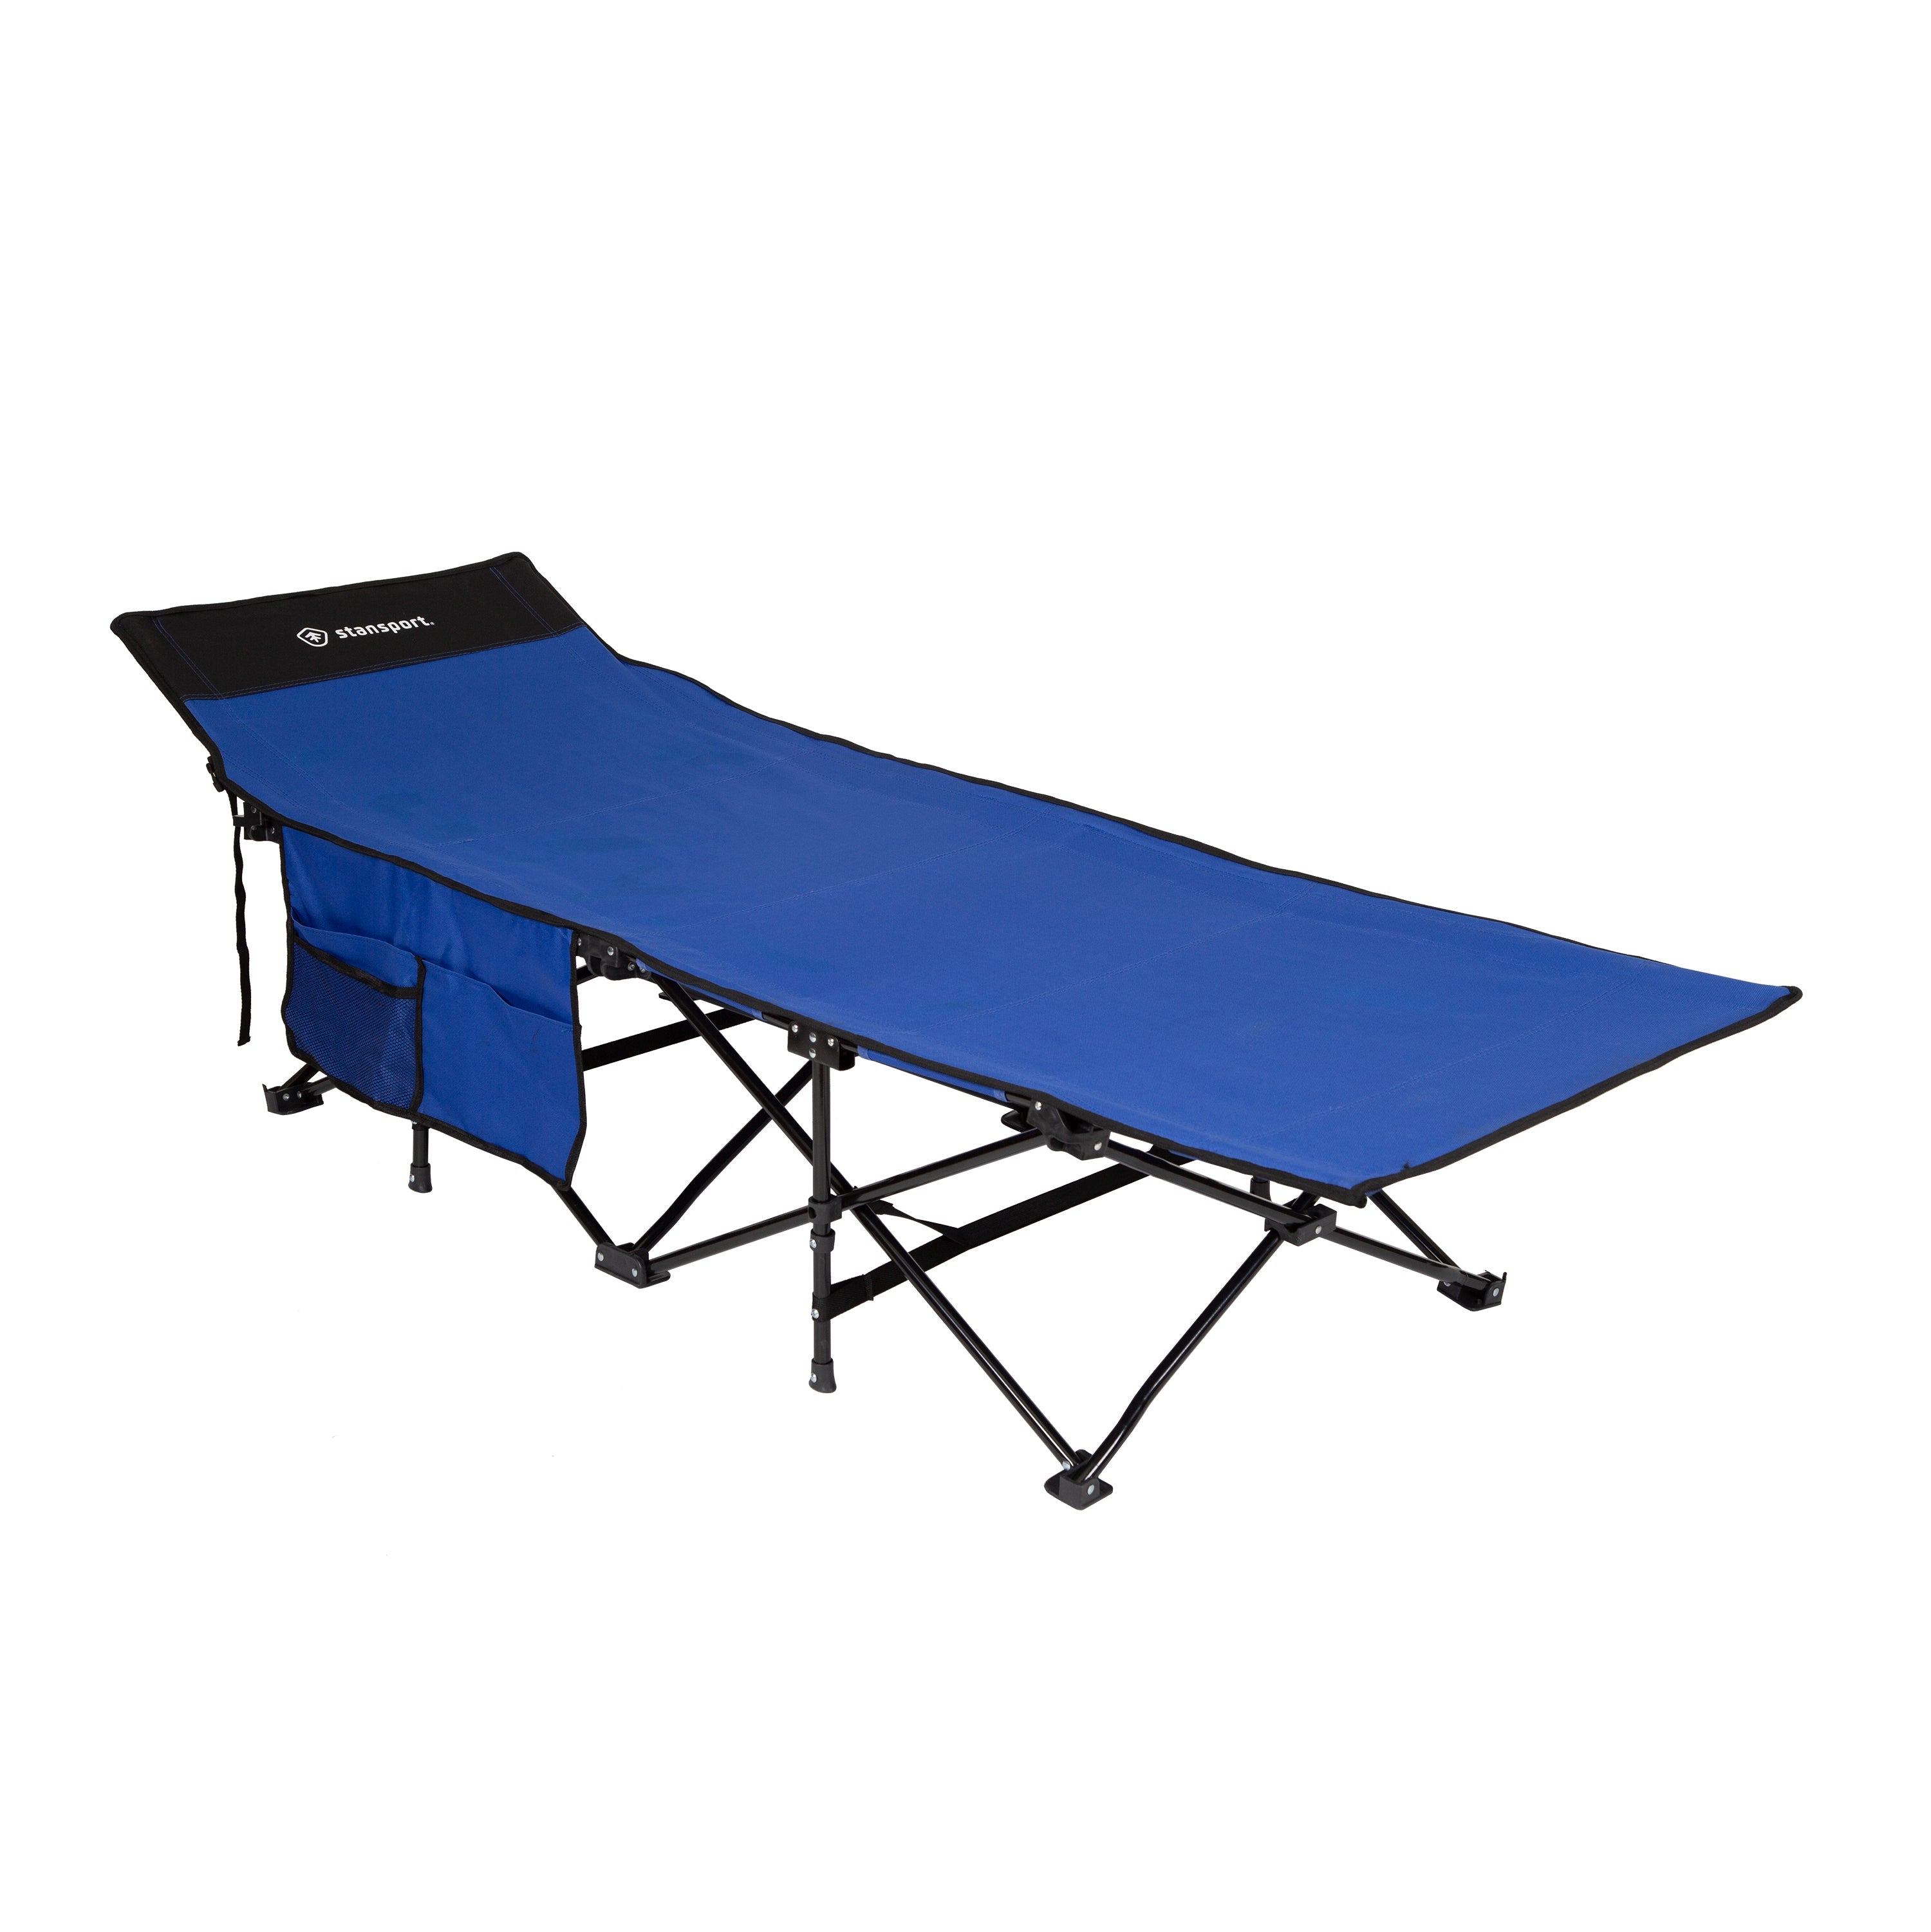 Easy Set Up Folding Cot - 75 X 26 X 14.9/20.5 Inches